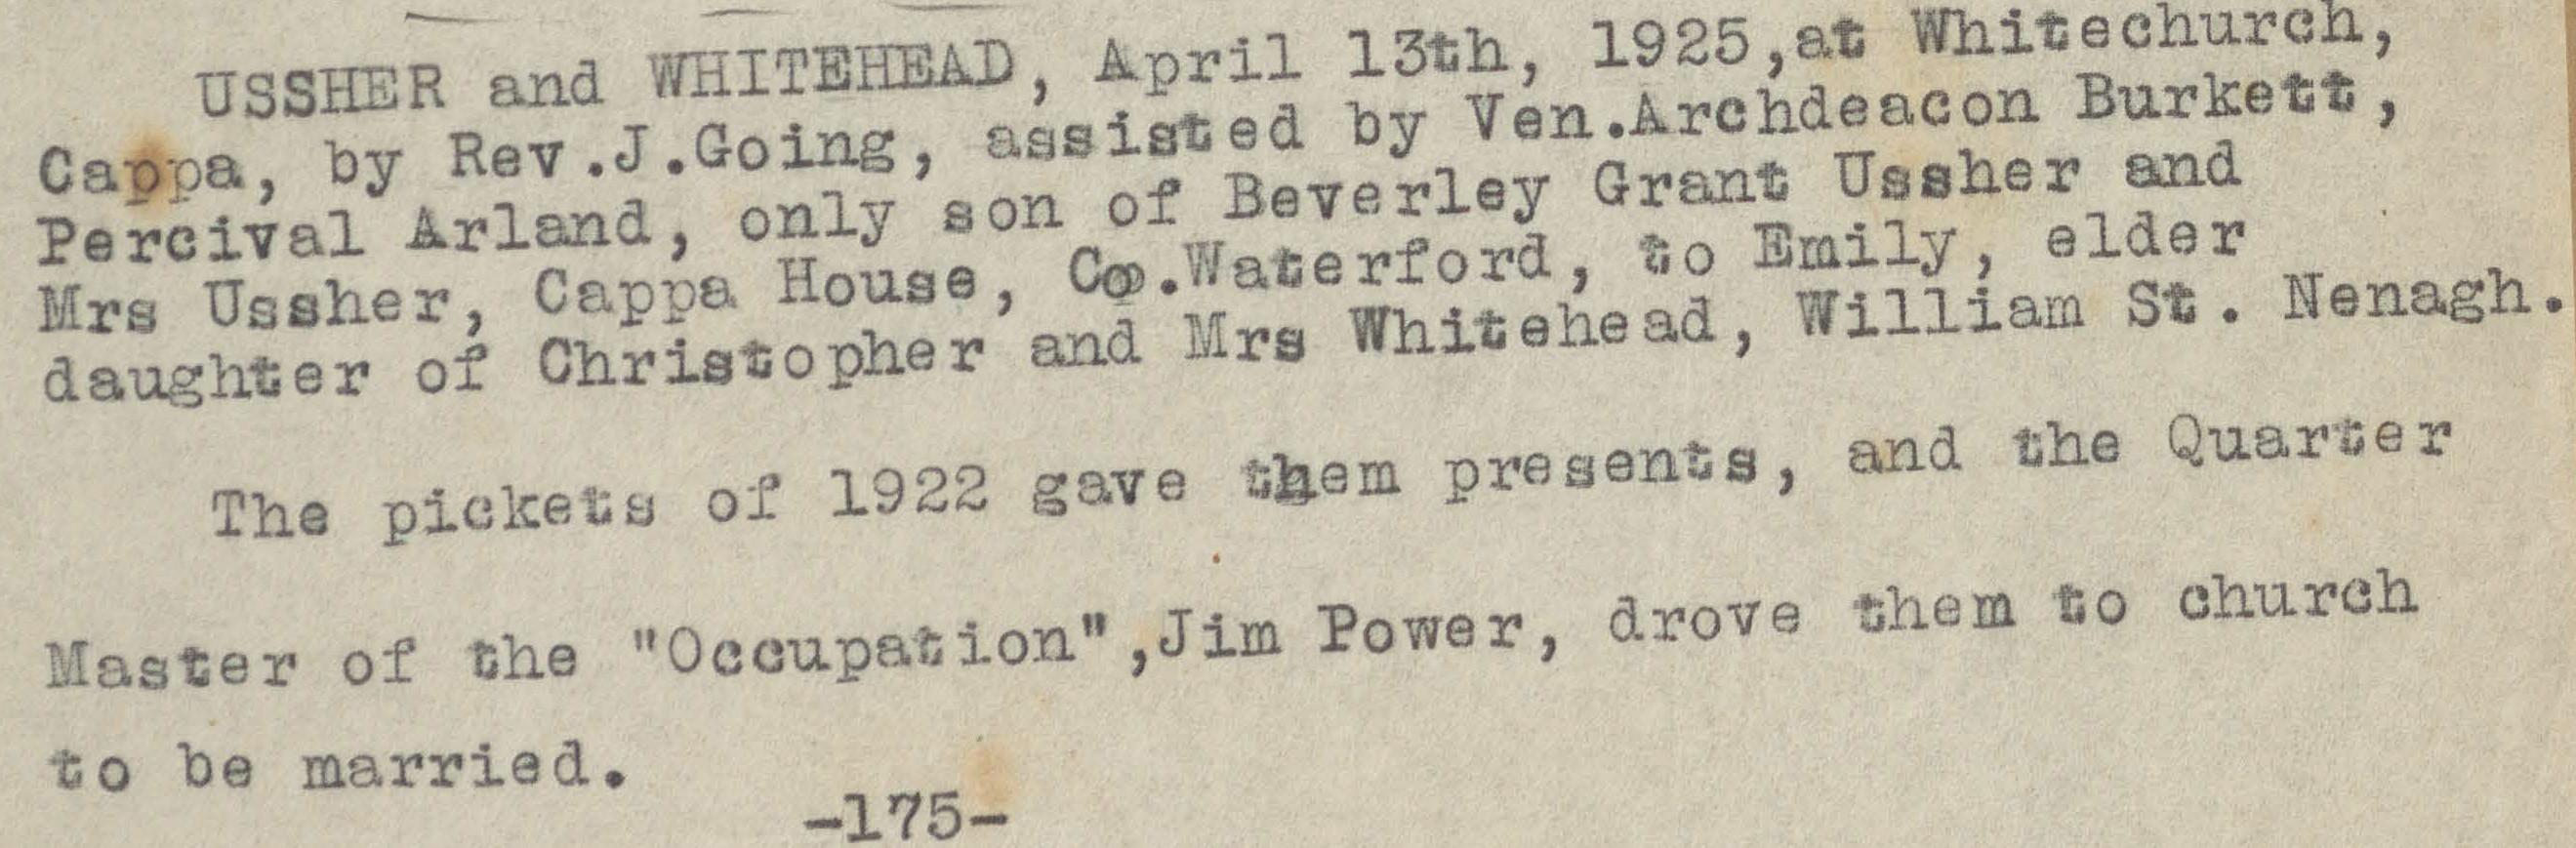 Reference to the wedding of Percy Ussher to Emily Whitehead, 13 April 1925, RCB Library MS 70